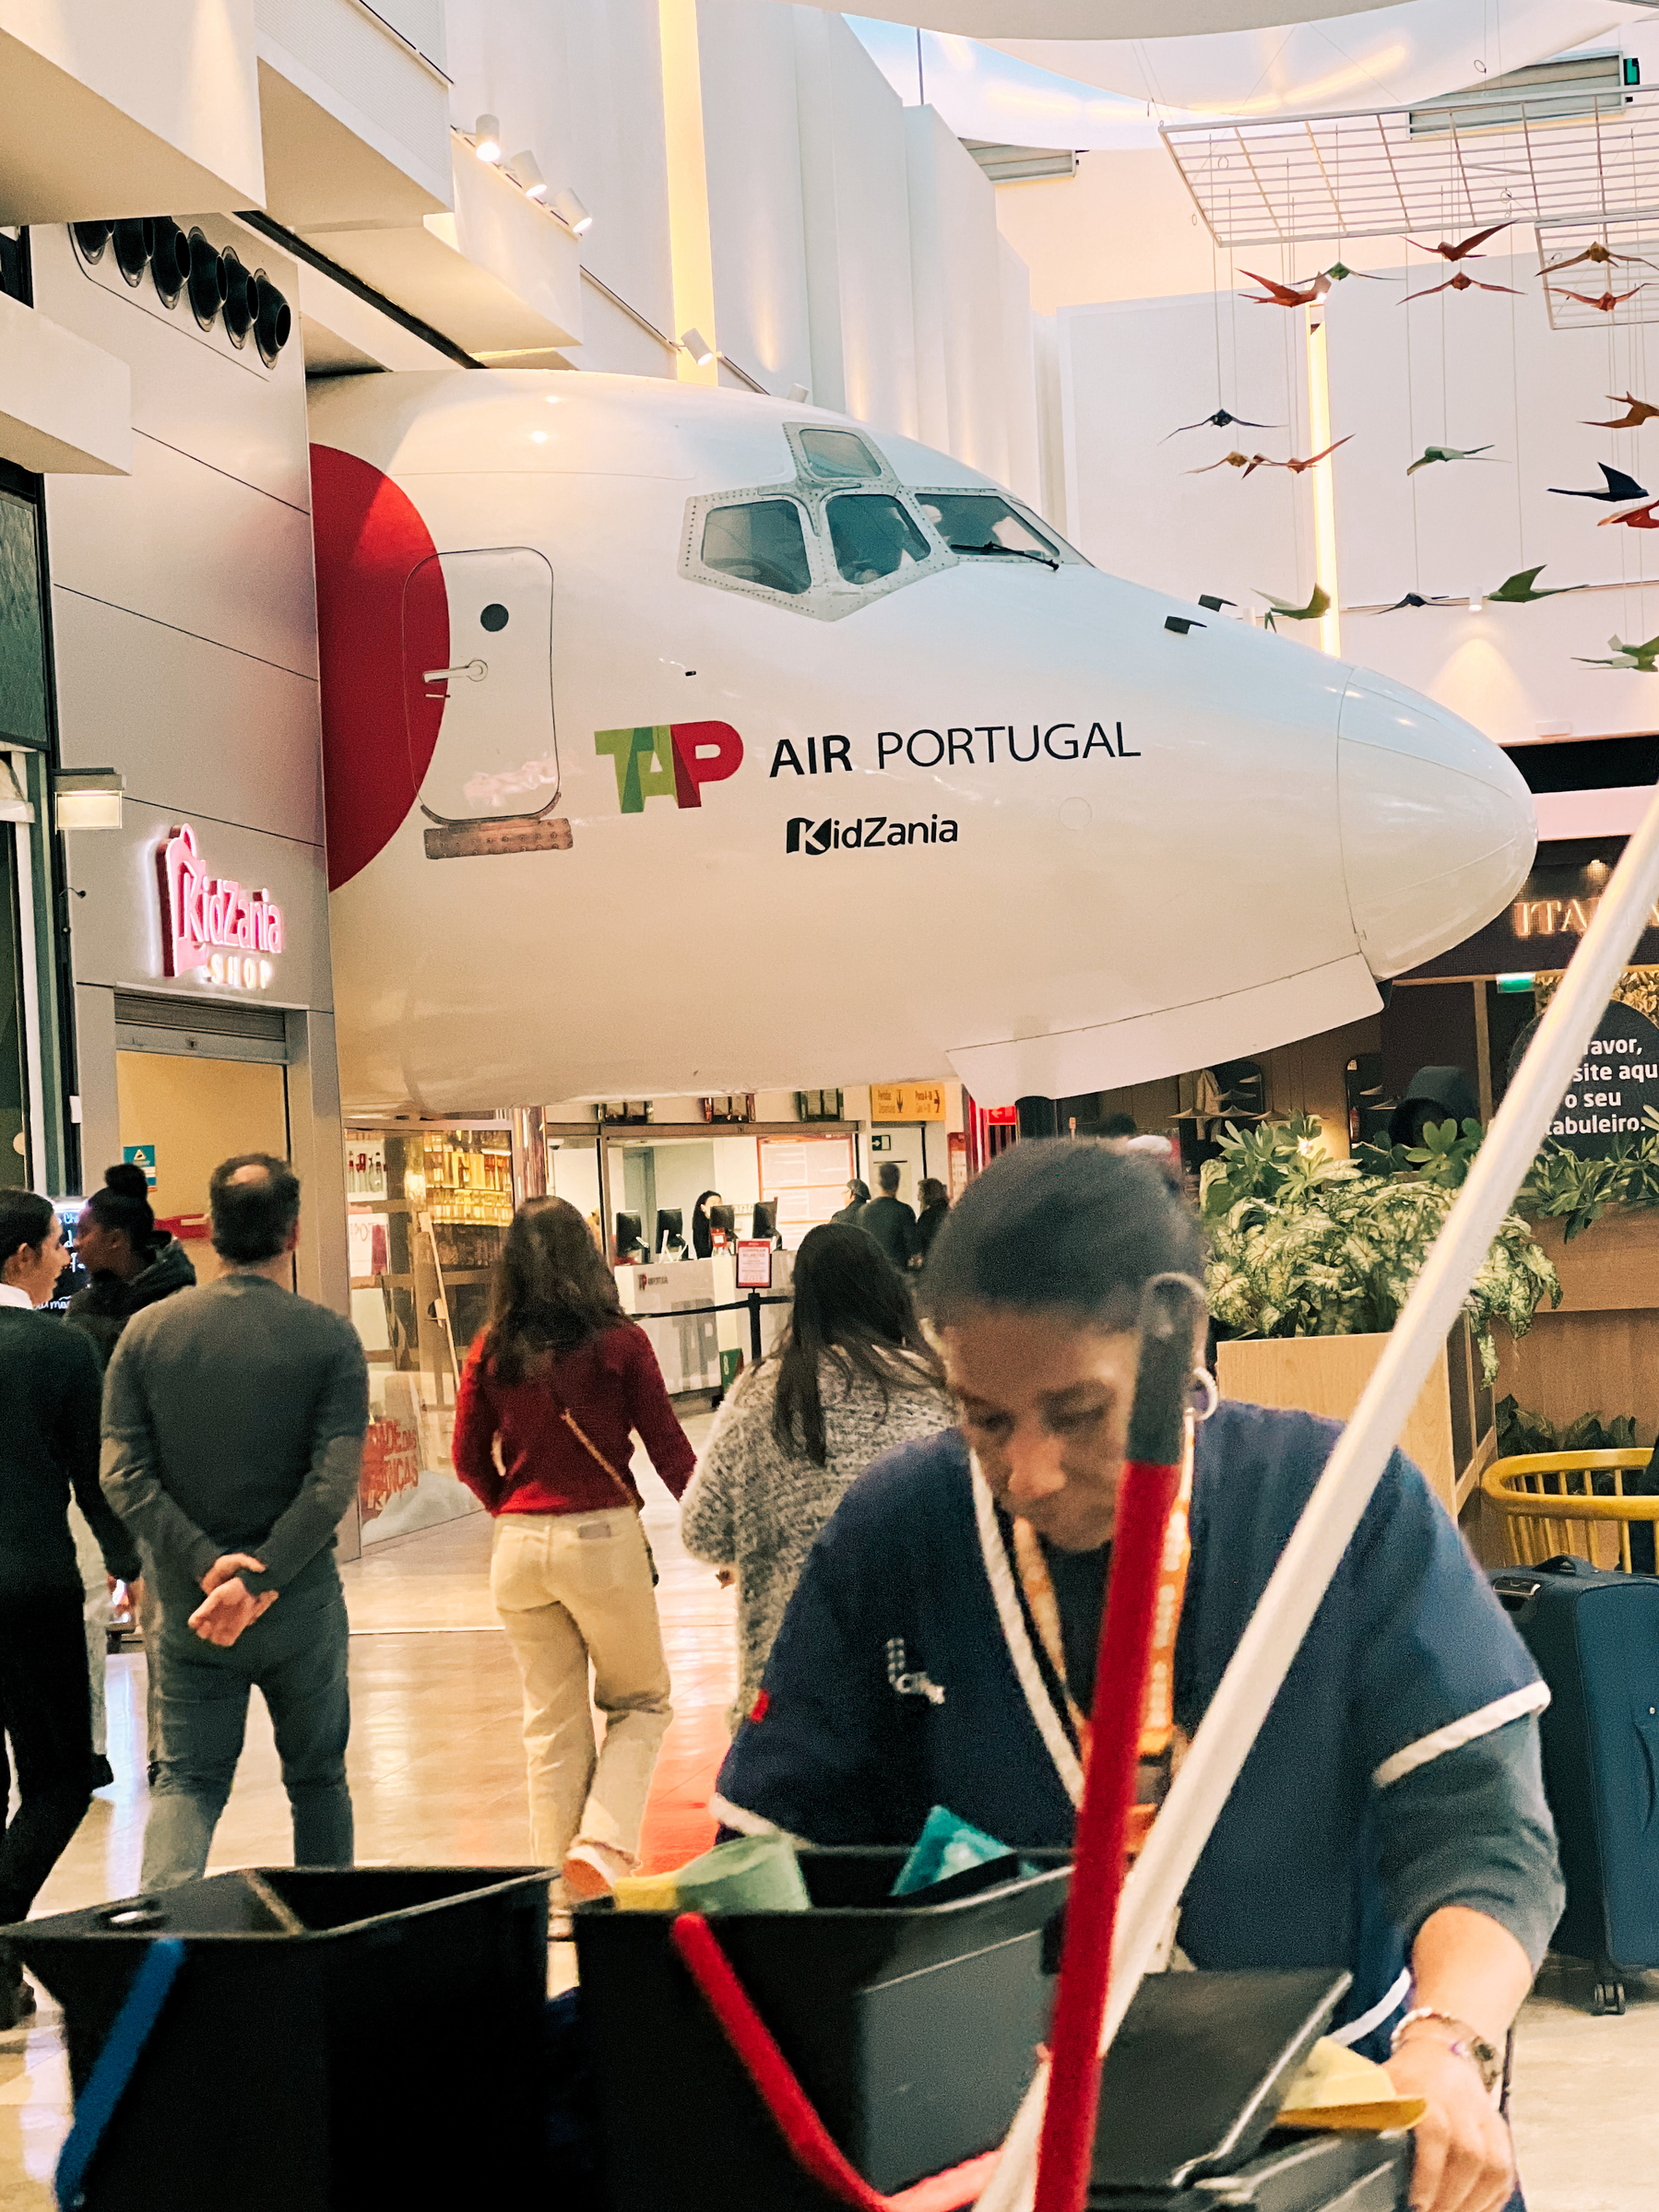 A shopping center with a large model of a TAP Air Portugal aircraft prominently displayed. Below, people are walking around, and a person is in the foreground cleaning with a cart of supplies.